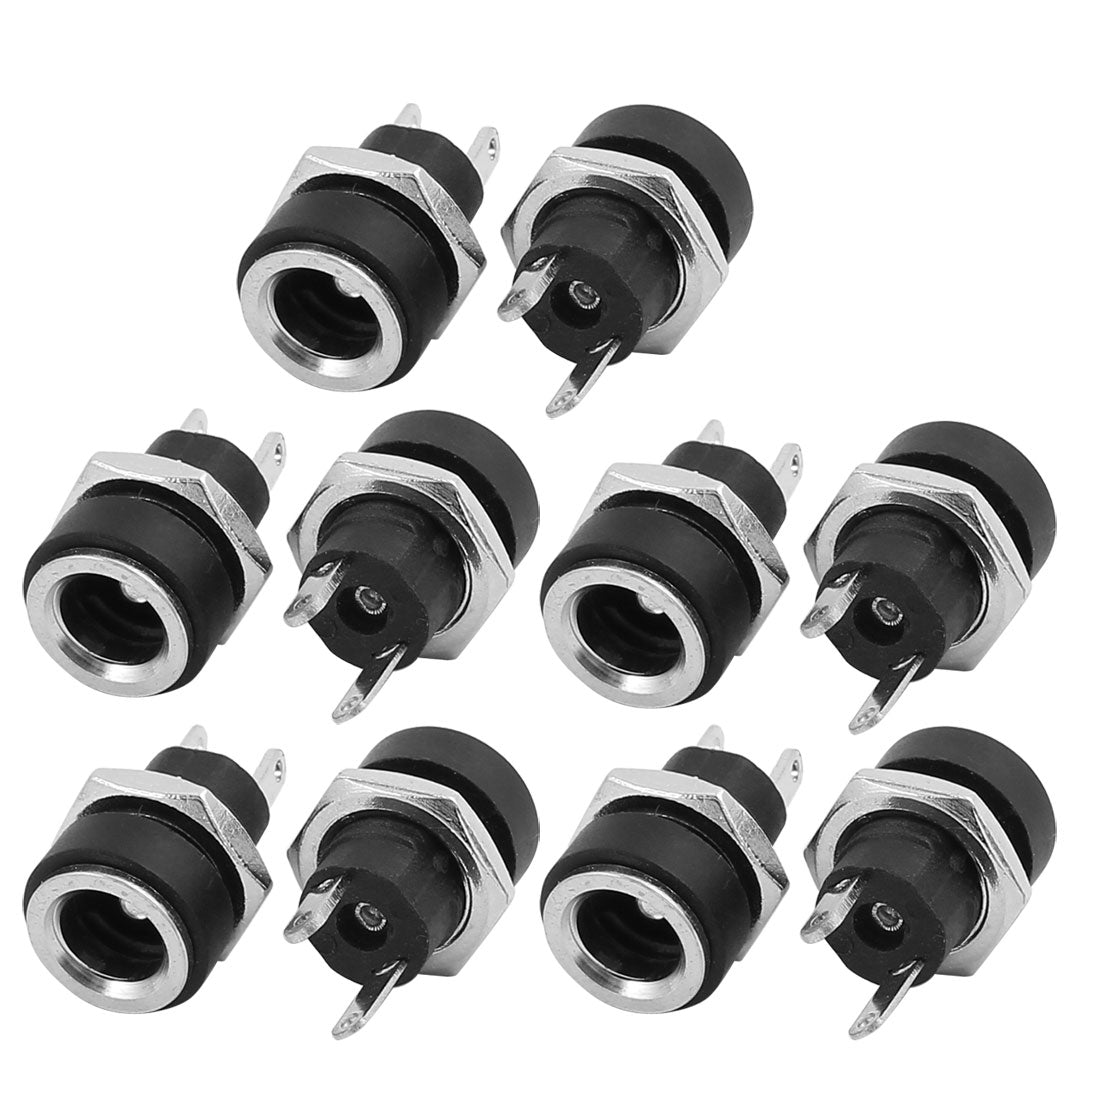 uxcell Uxcell 10Pcs DC Socket 5.5mm x 2.1mm Electrical Accessories KR1610130721